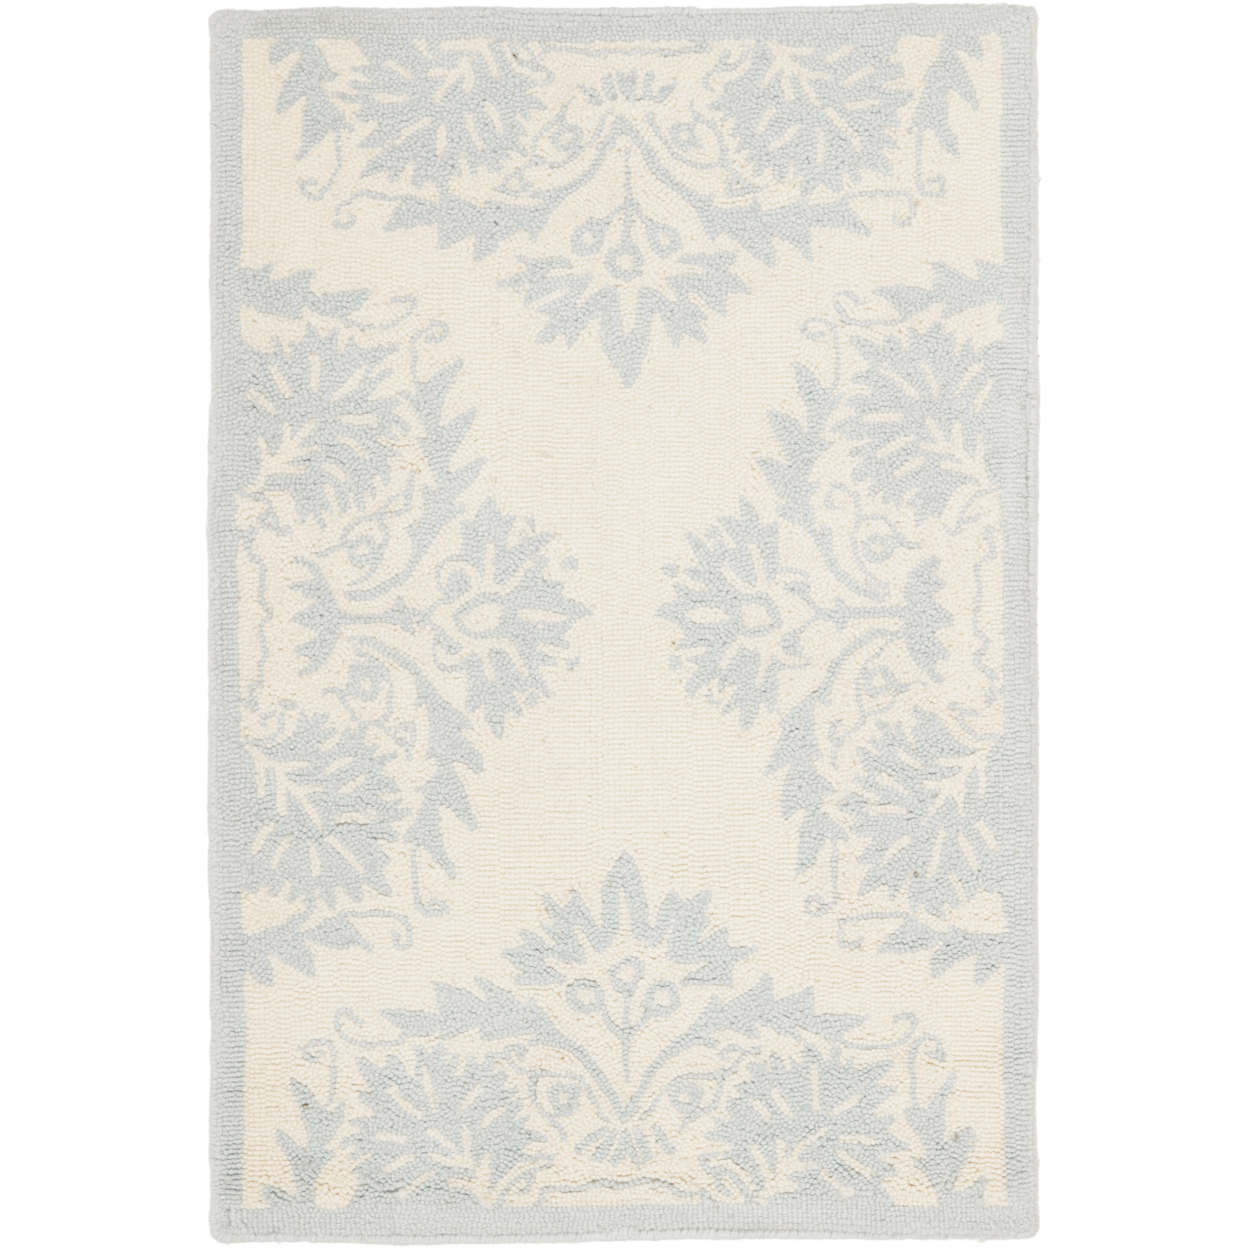 SAFAVIEH Chelsea HK359A Hand-hooked Ivory / Blue Rug - 1' 8 X 2' 6